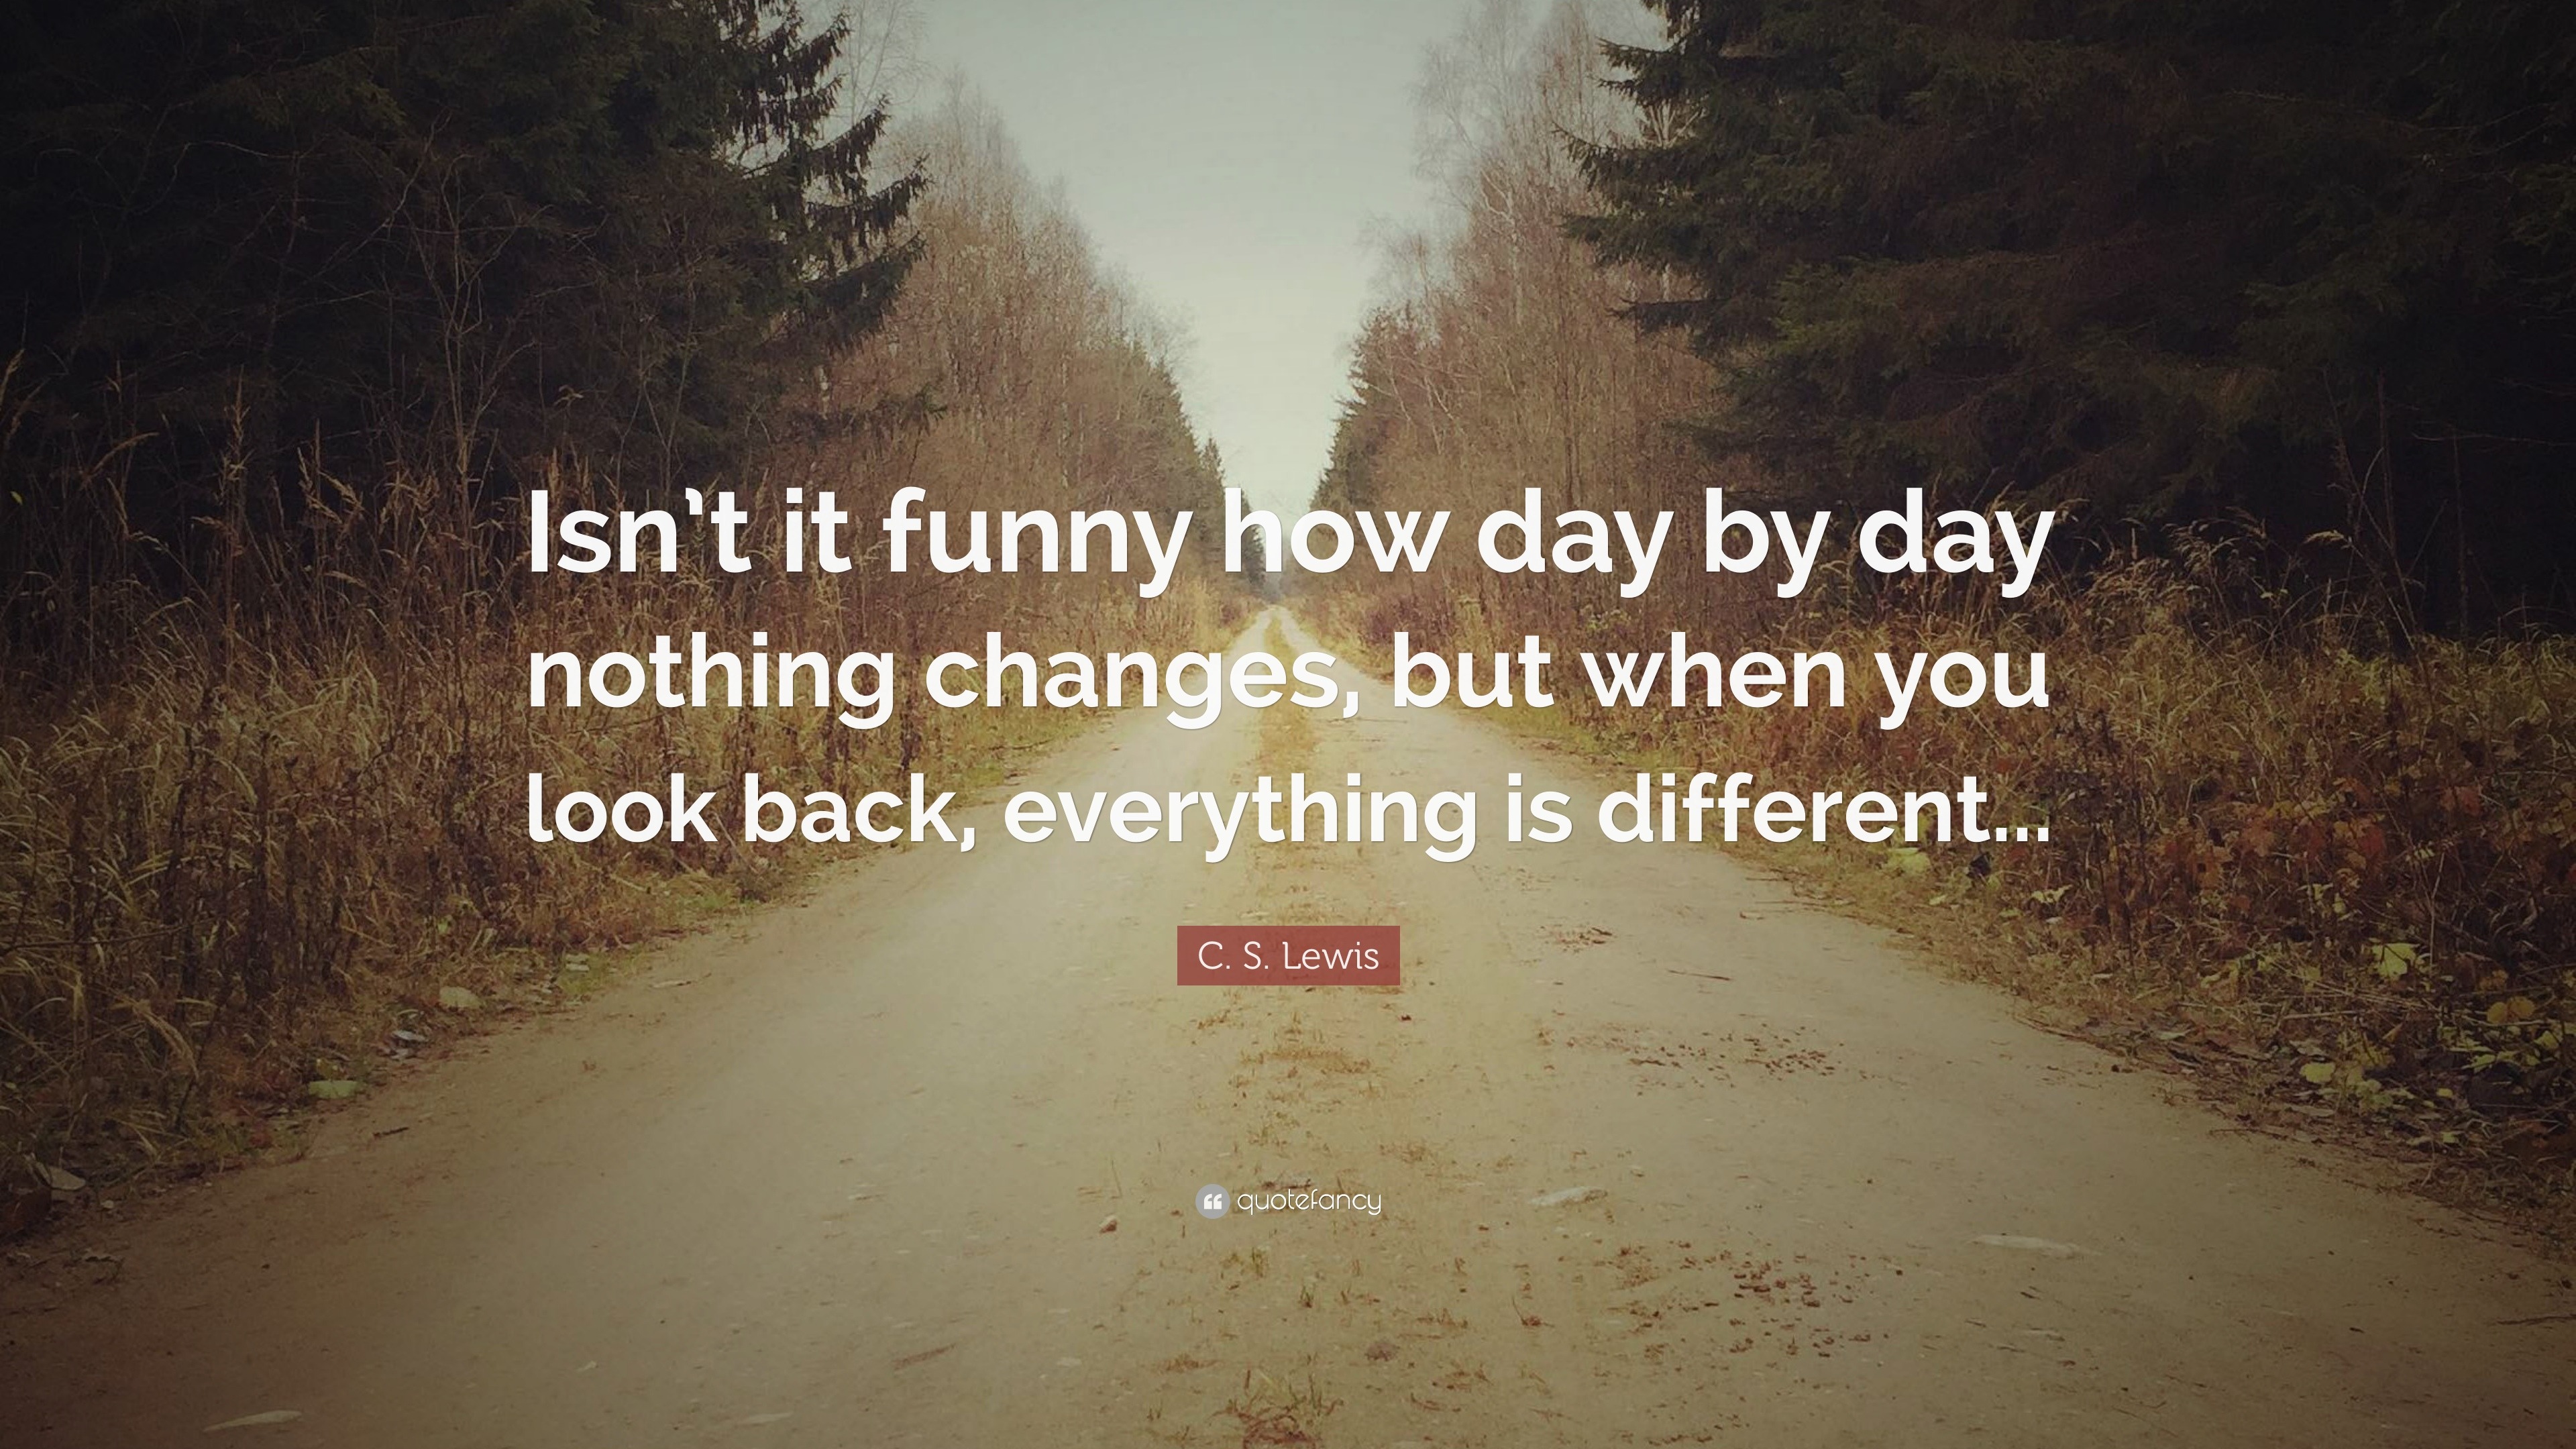 C. S. Lewis Quote: “Isn’t it funny how day by day nothing changes, but